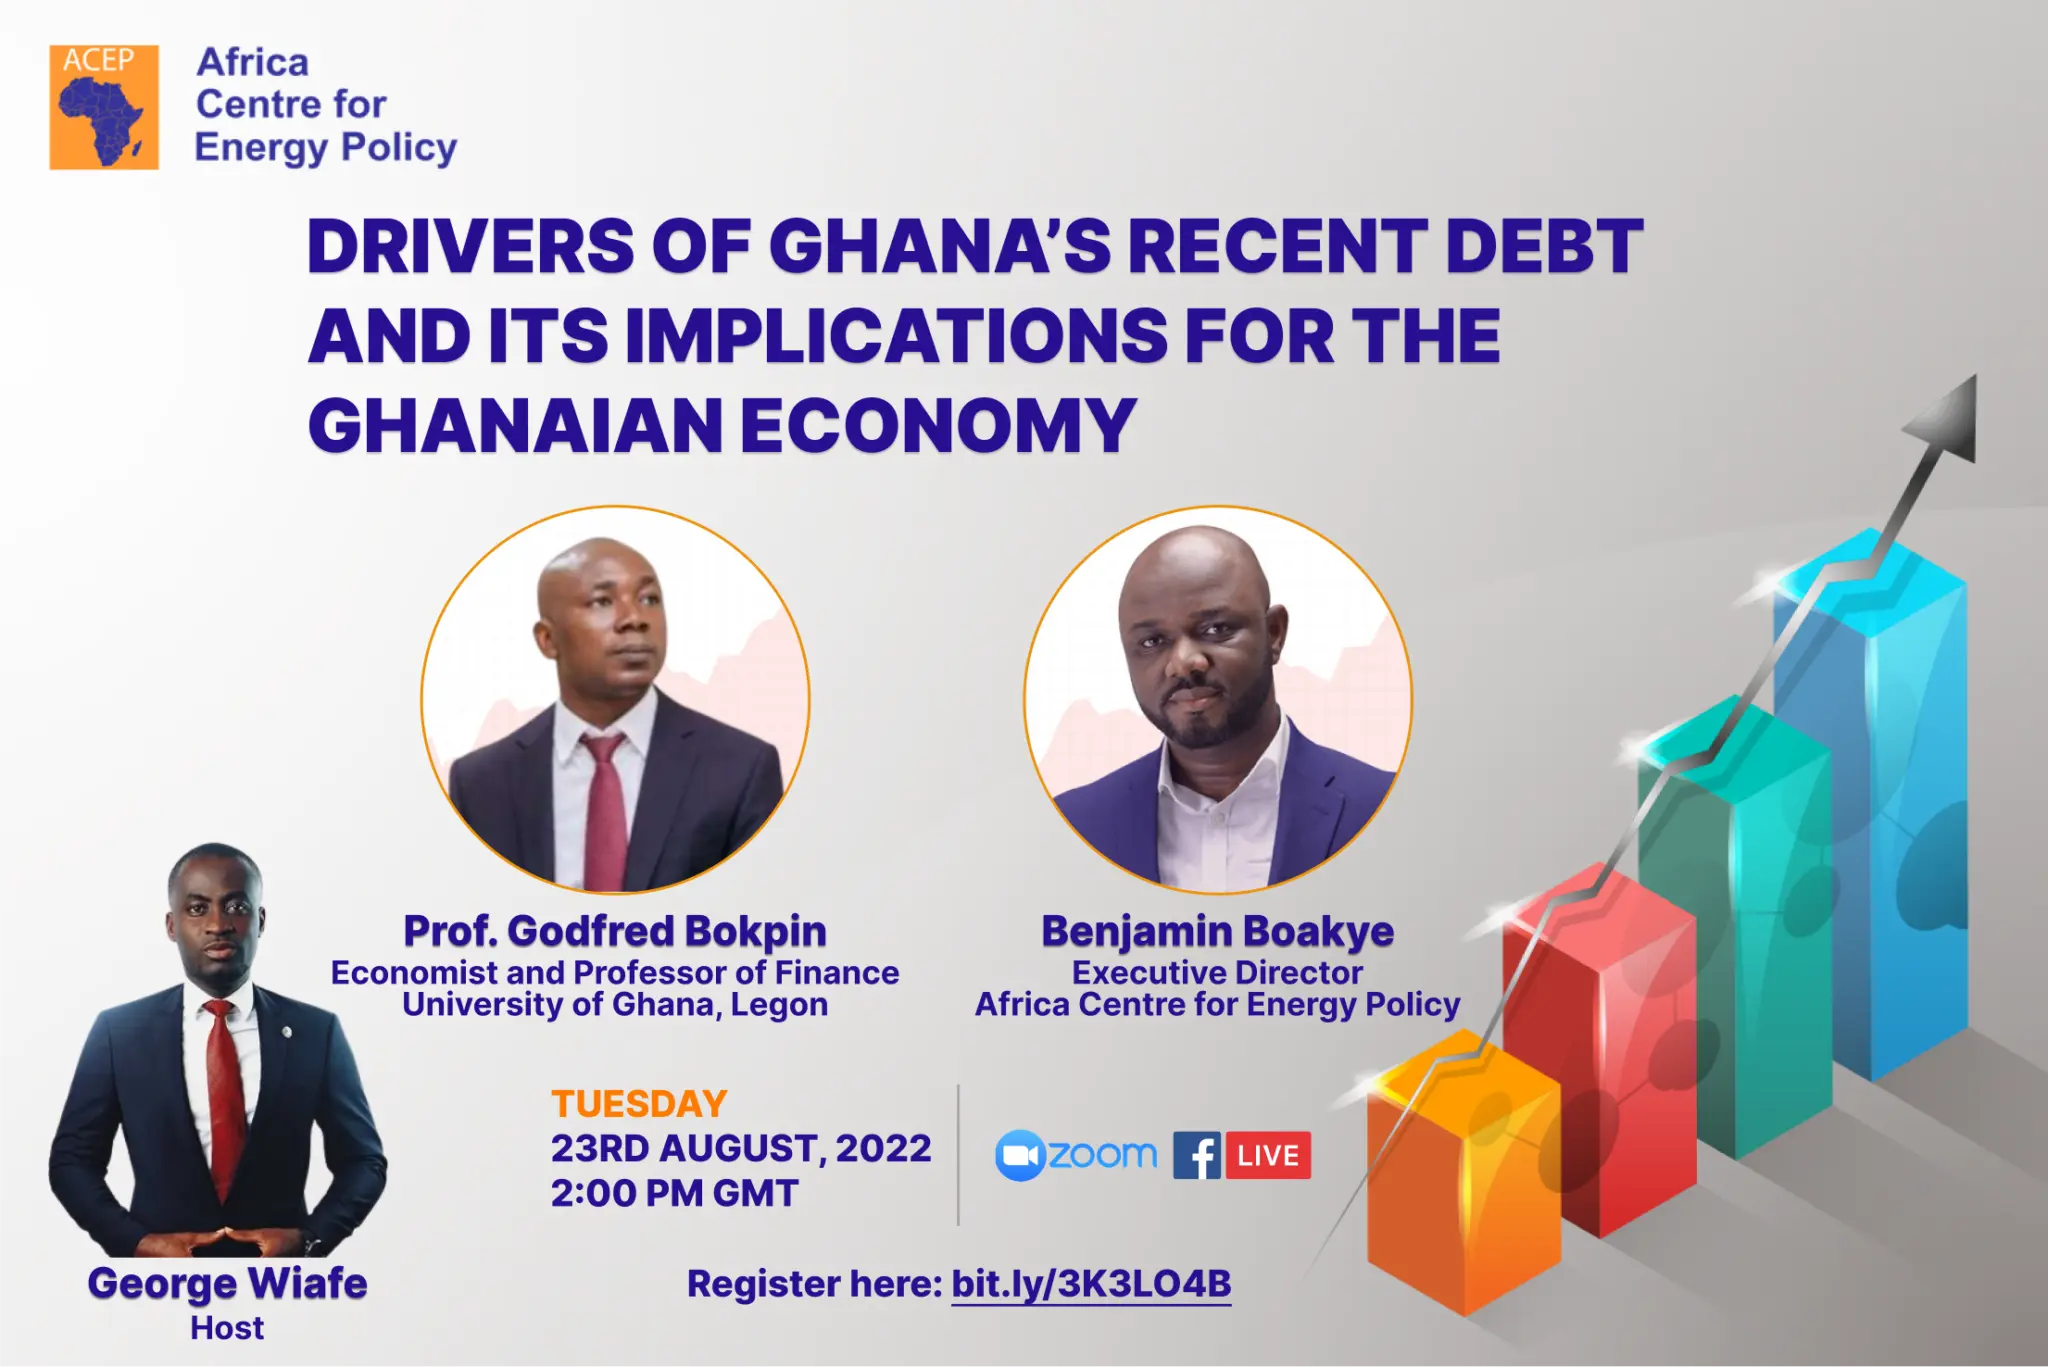 Drivers of Ghana’s Recent Debt and its Implications for the Ghanaian Economy.